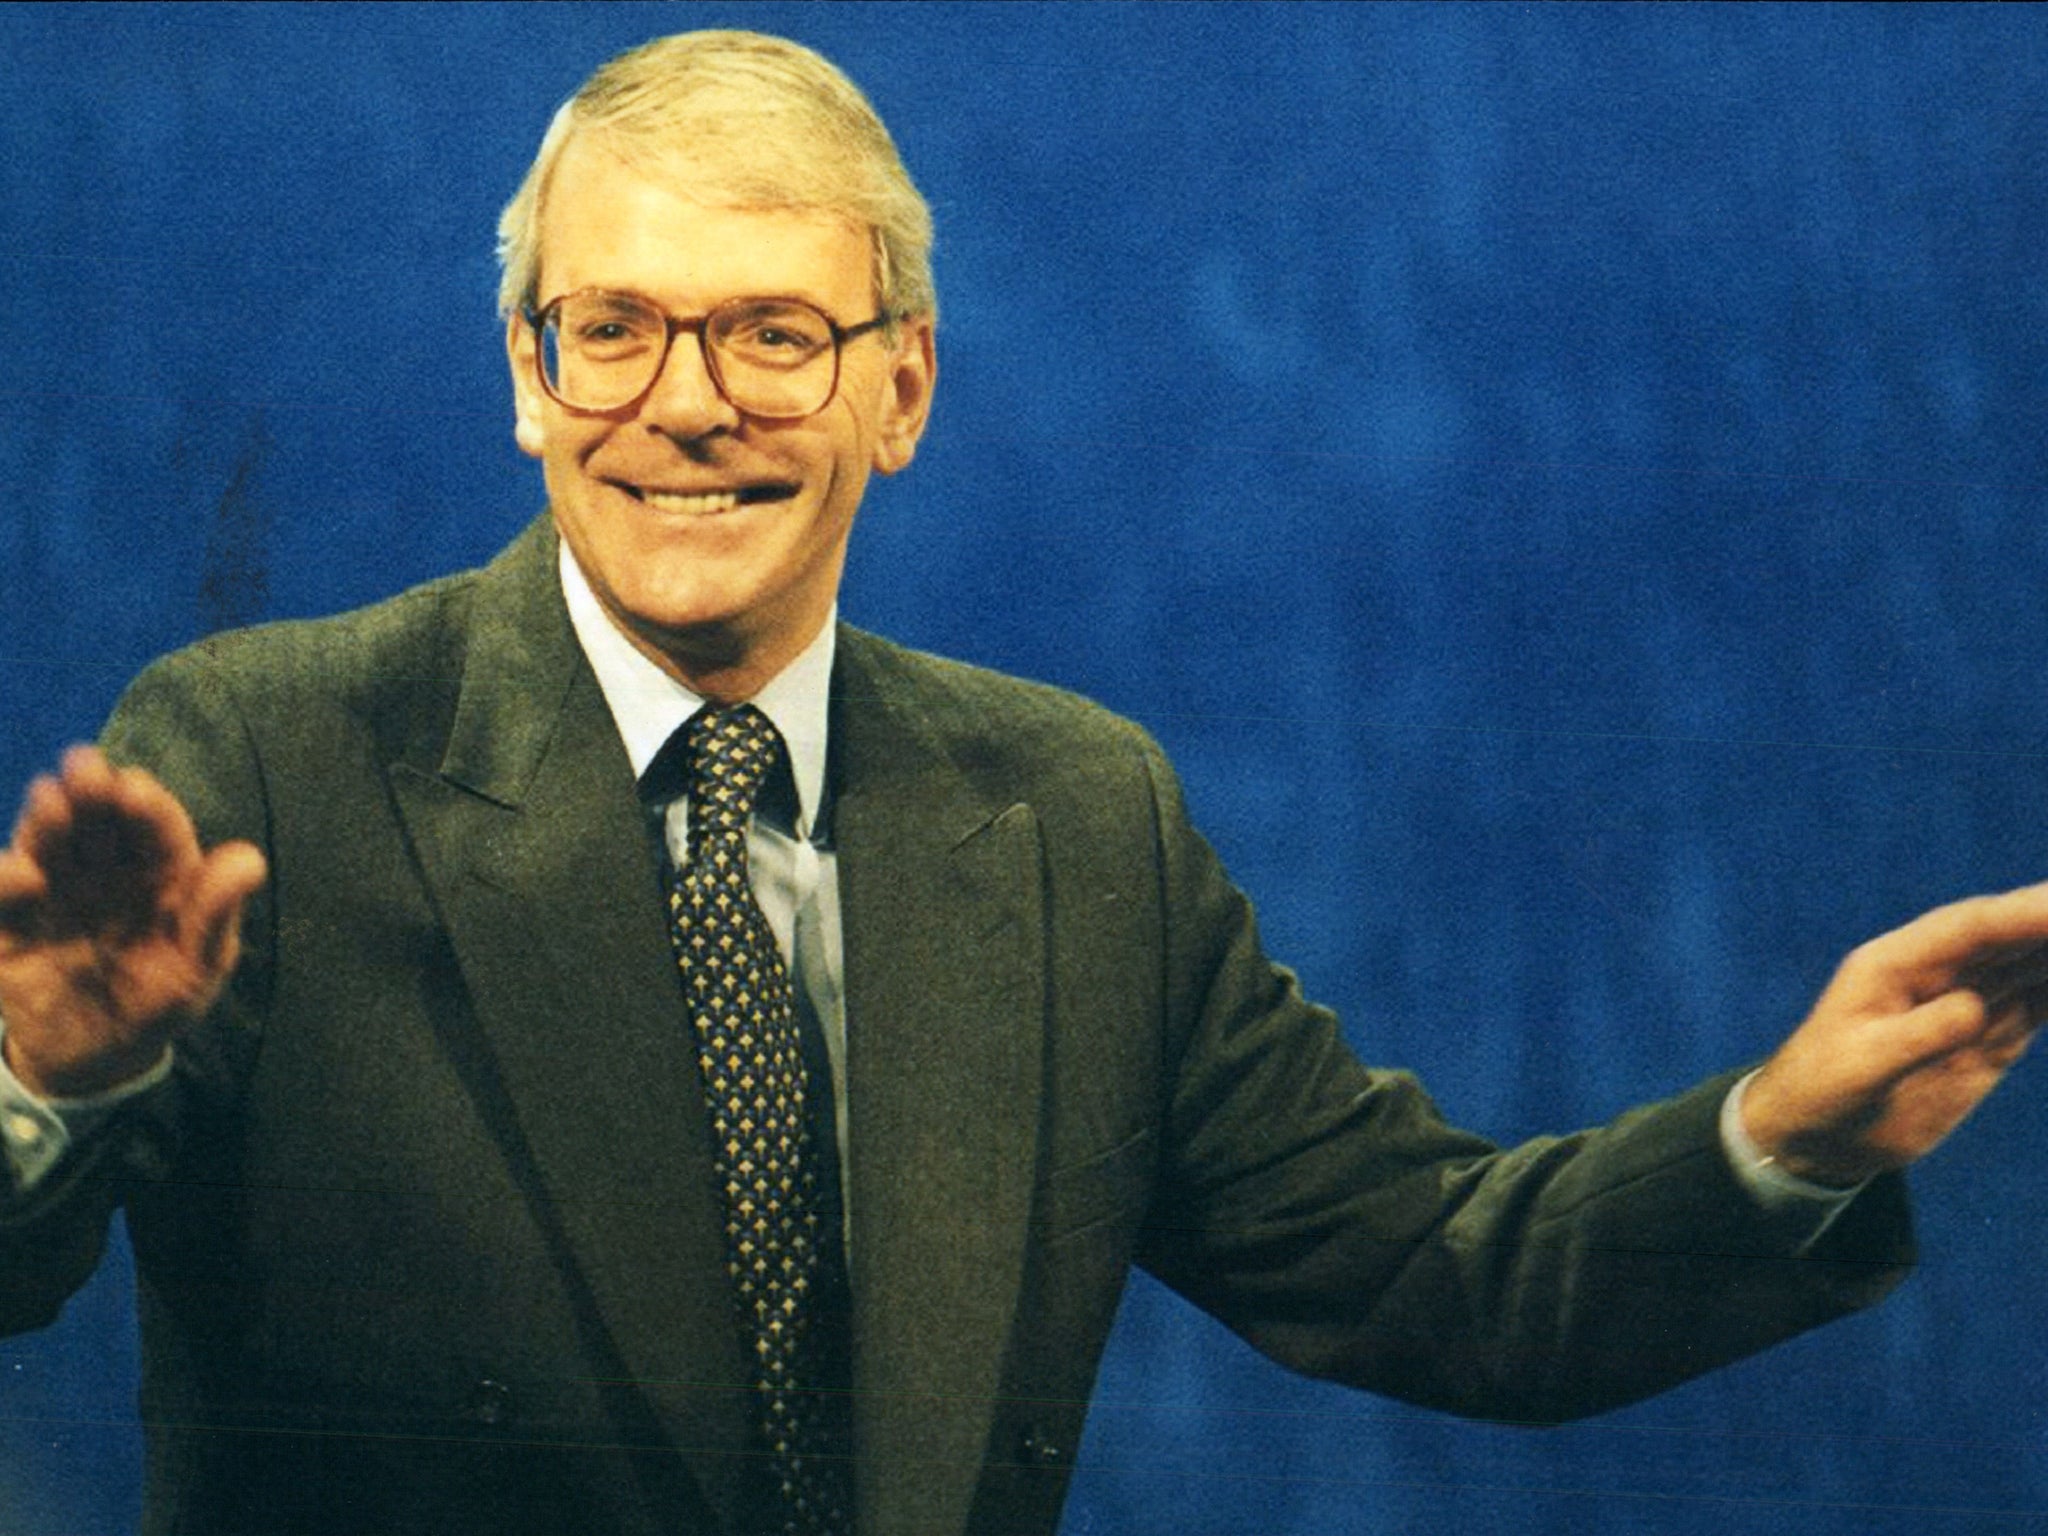 Sir John Major was Prime Minister between 1990 and 1997